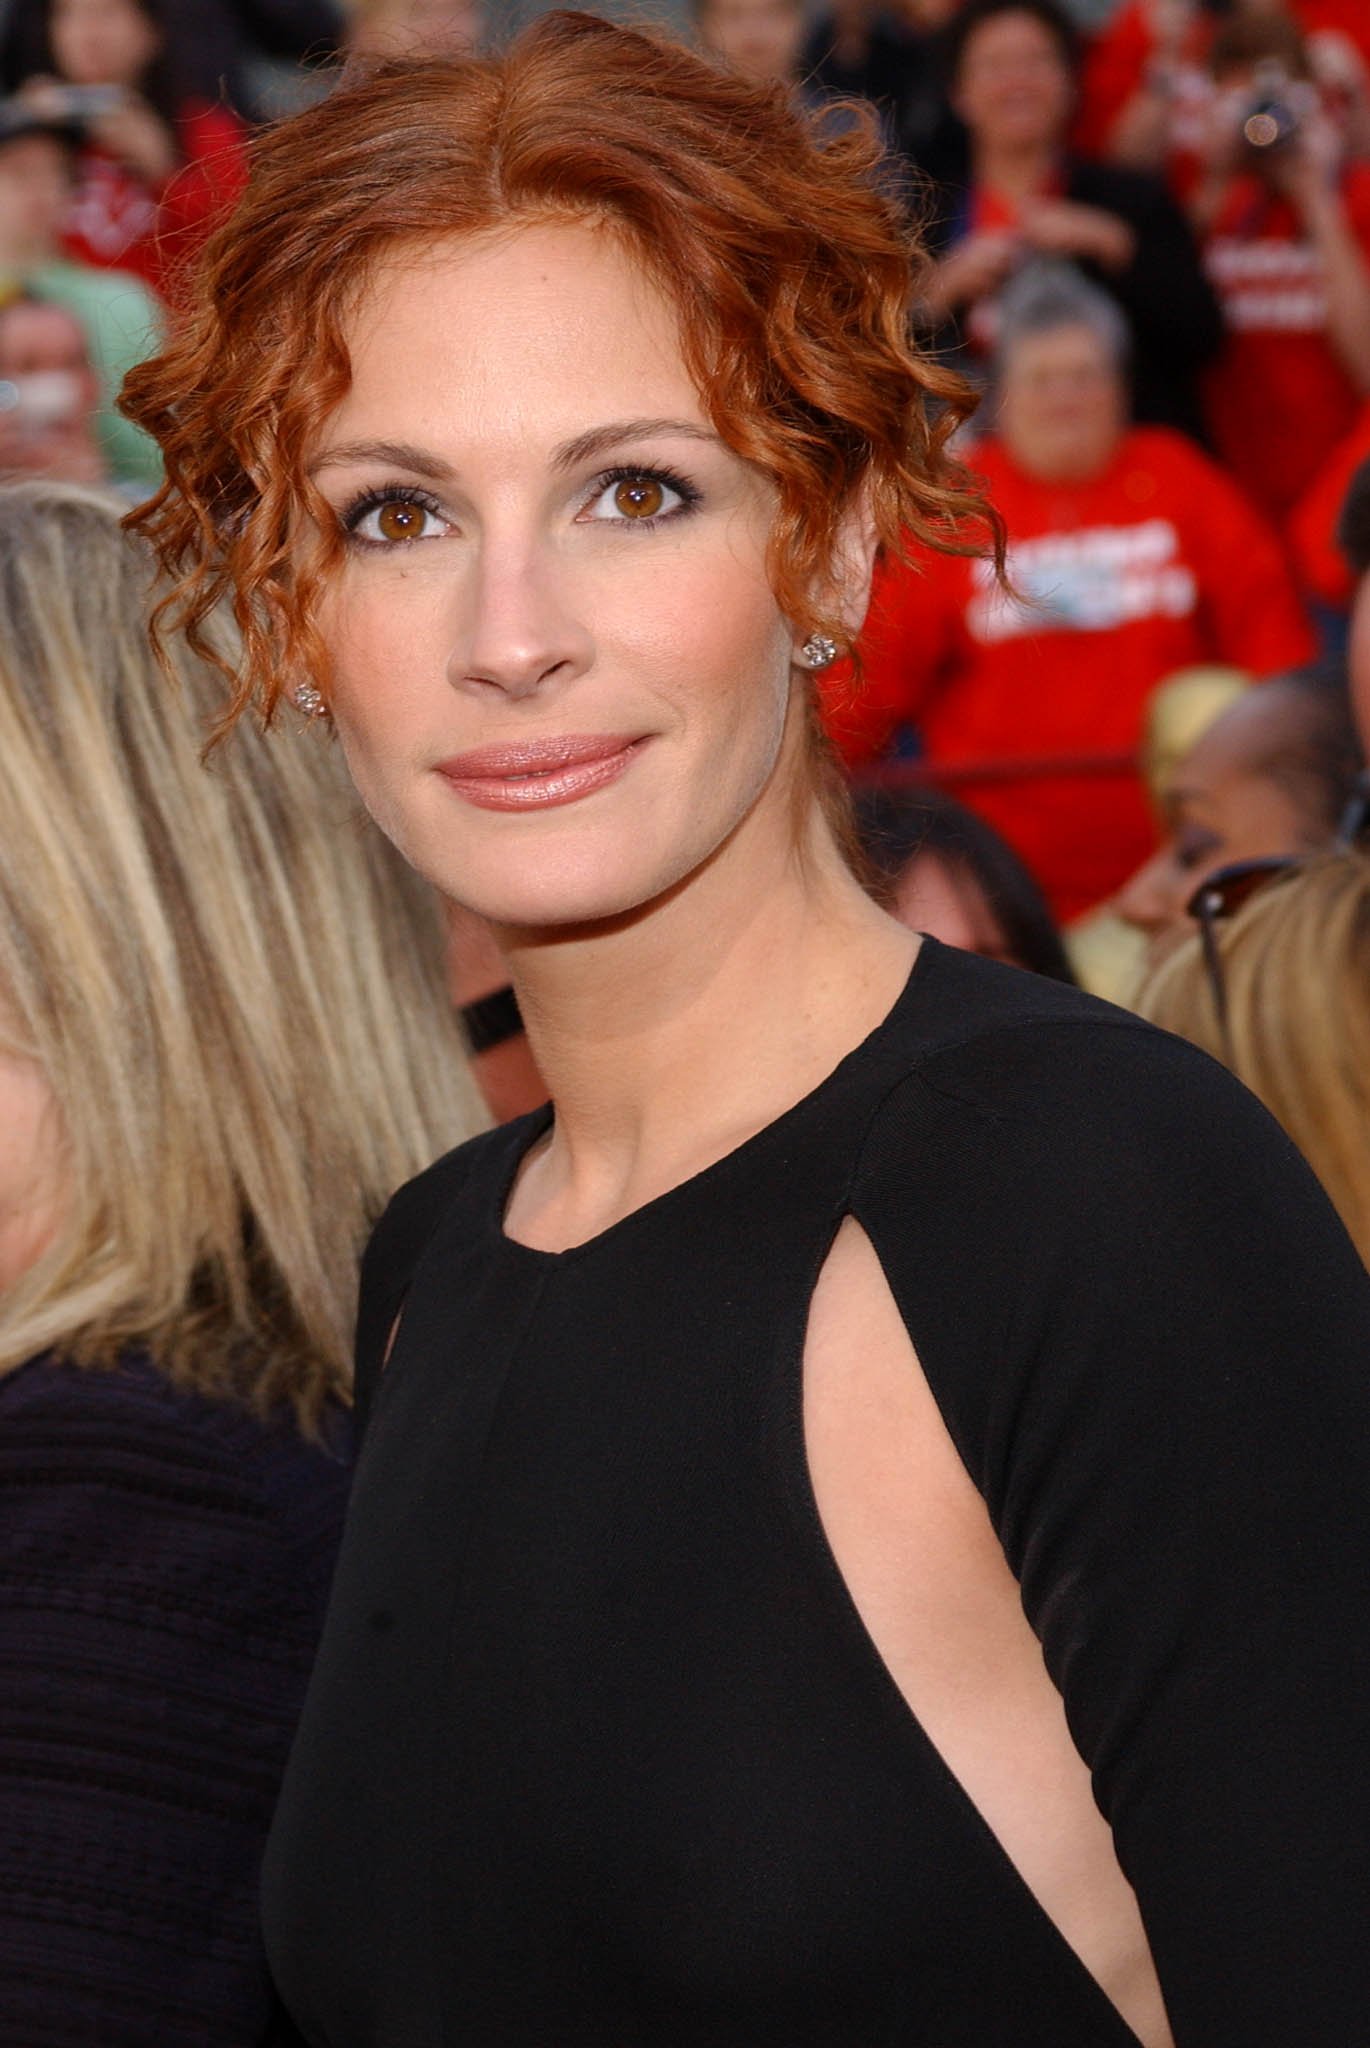 Julia Roberts in Hollywood, California 2002. | Source: Getty images